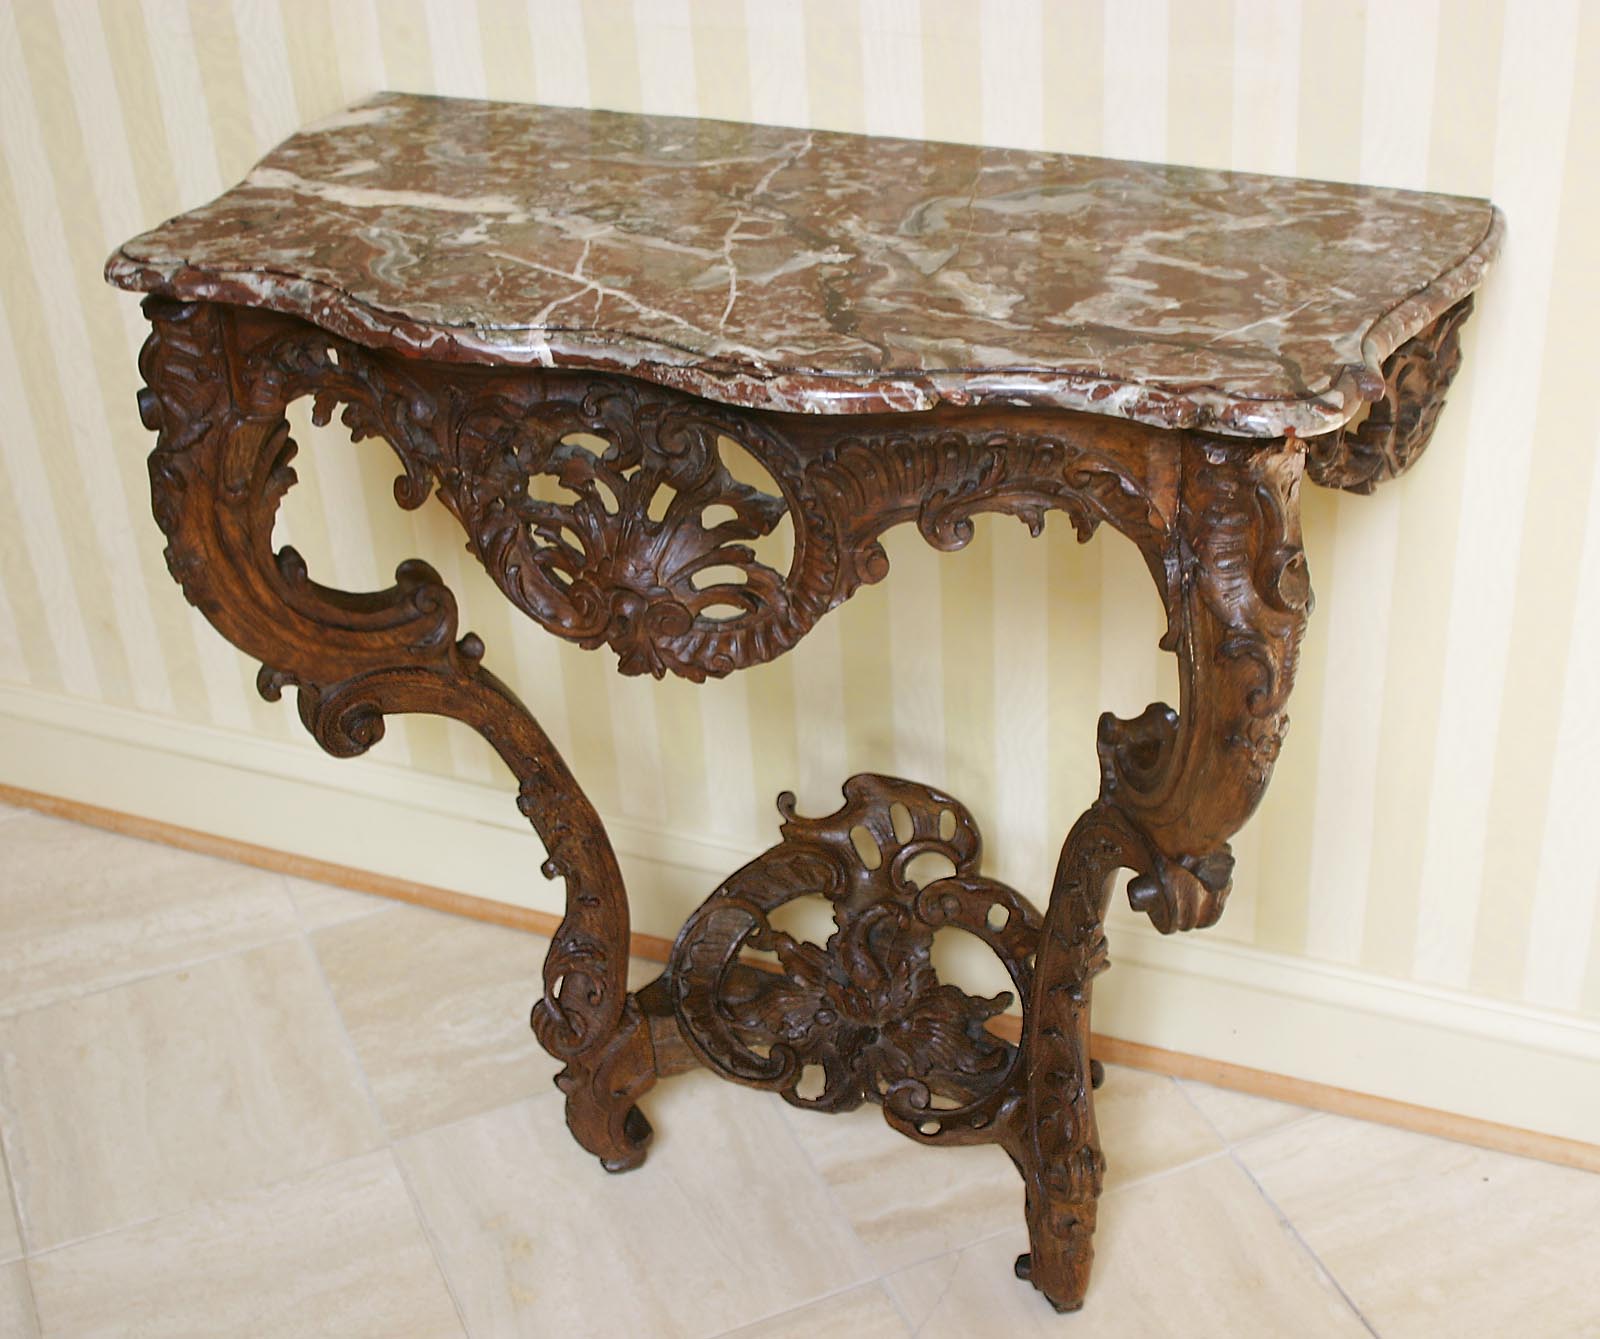 French, Rocaille period, console table